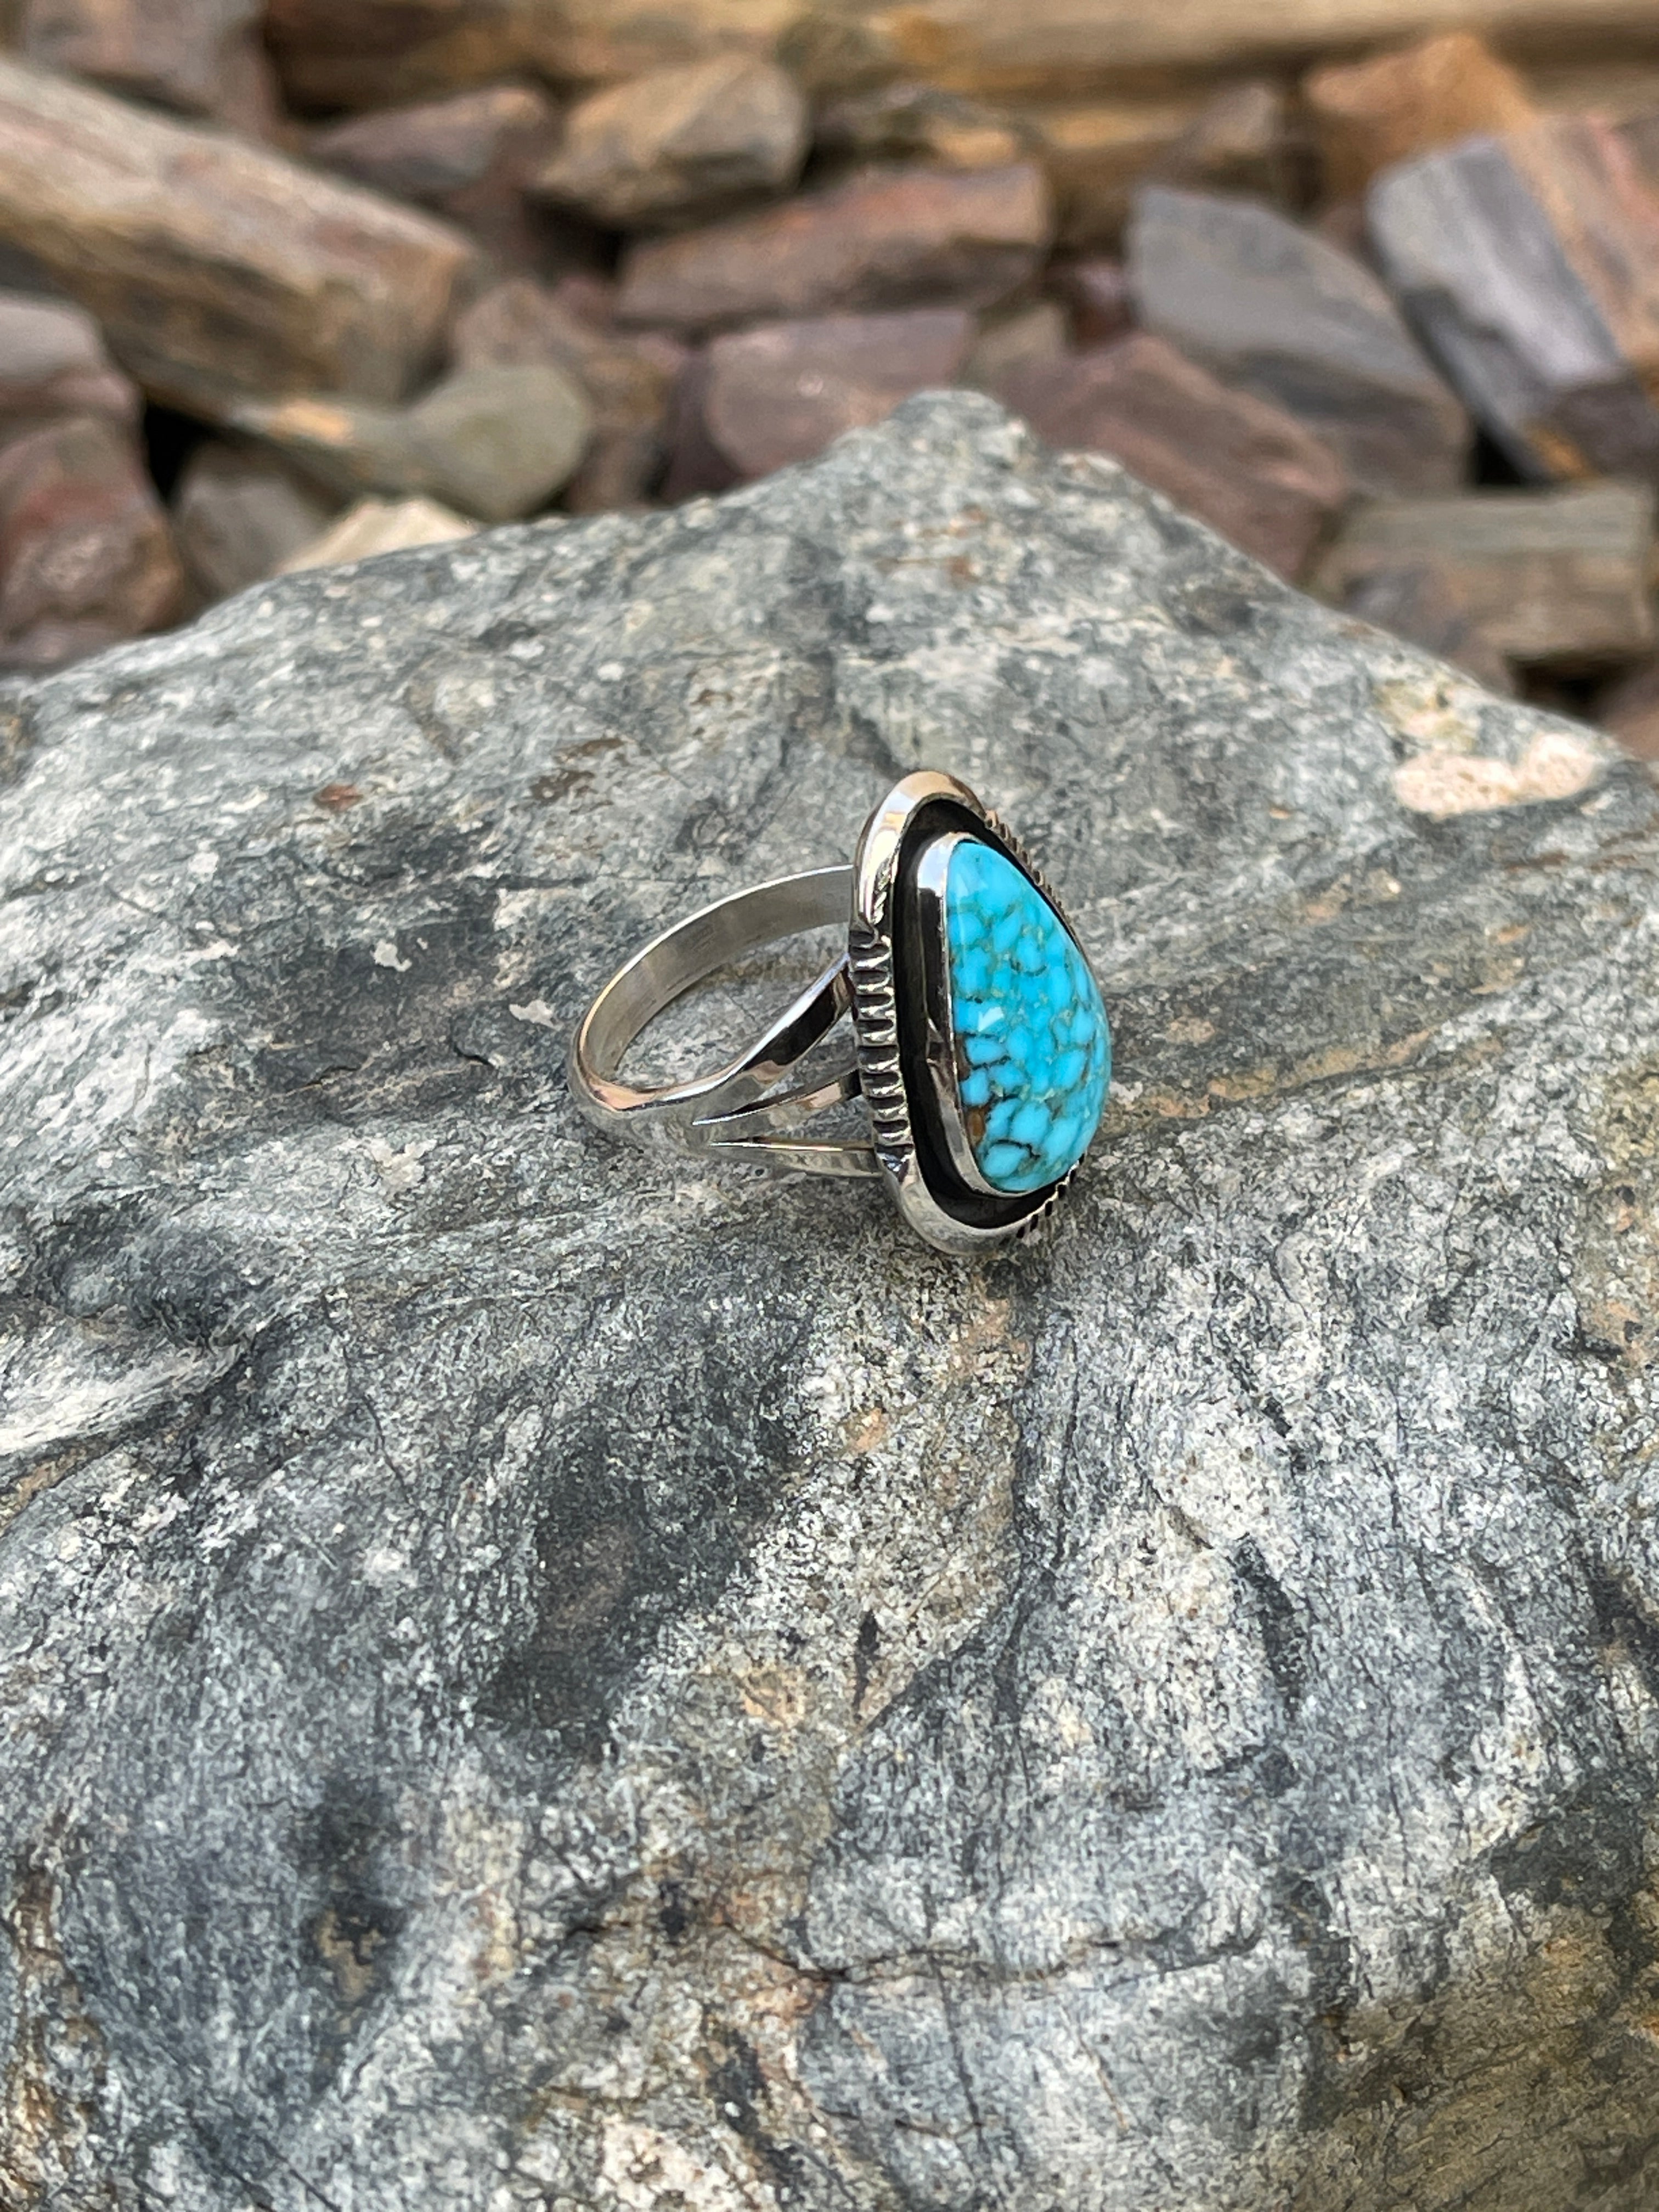 Handmade Solid Sterling Silver Turquoise Mountain Ring with Shadow Box Trim - Size 9 1/2